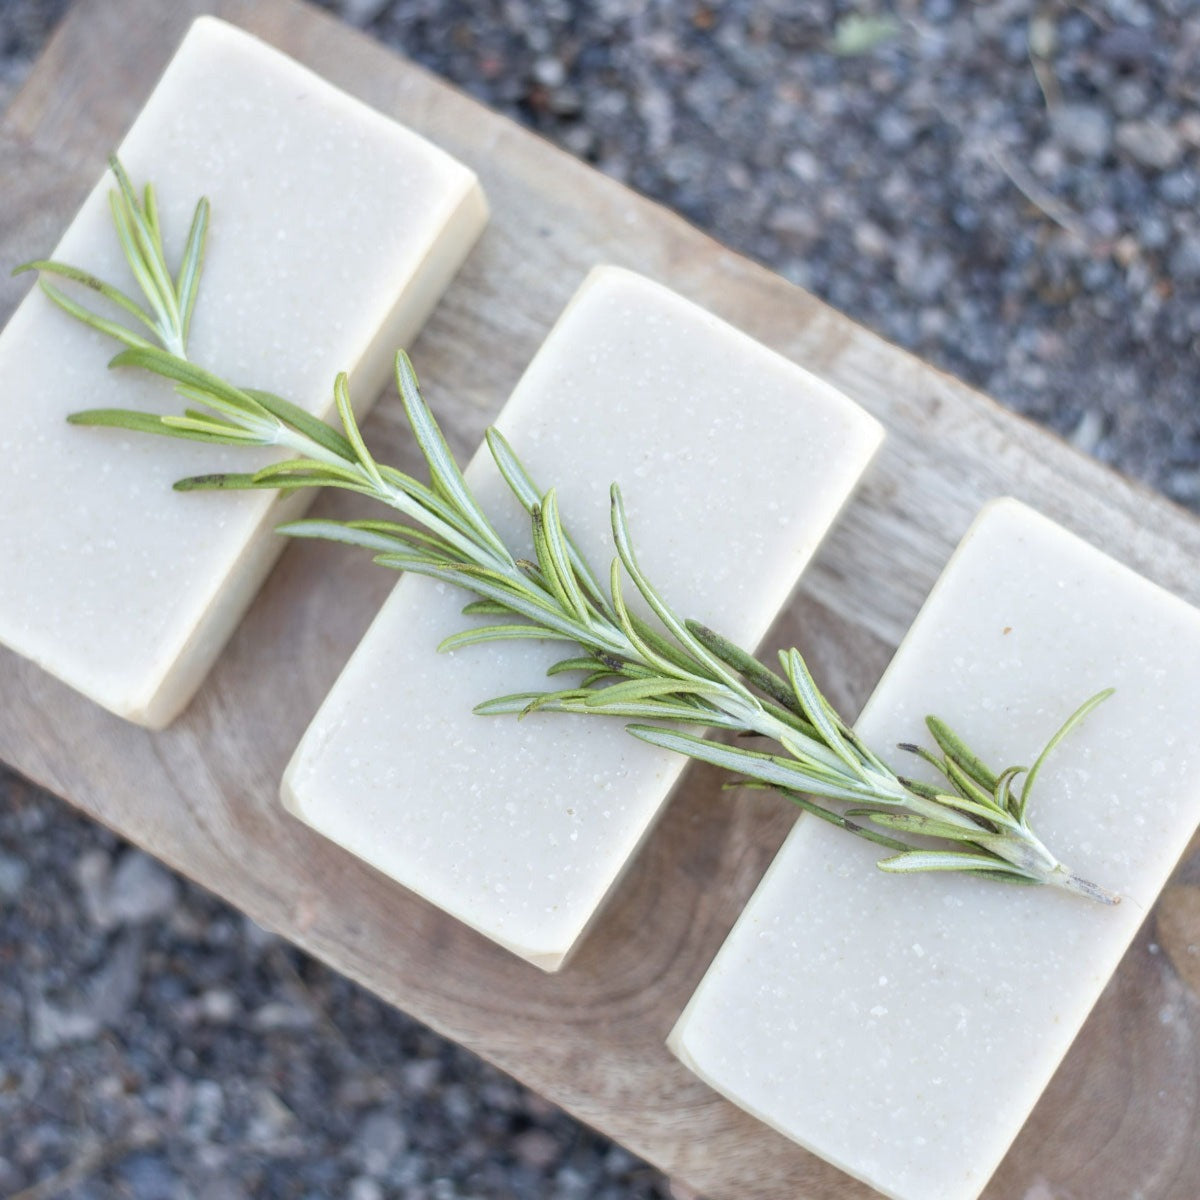 3 all natural bar soaps that are lined up, topped with rosemary herbs and layer down